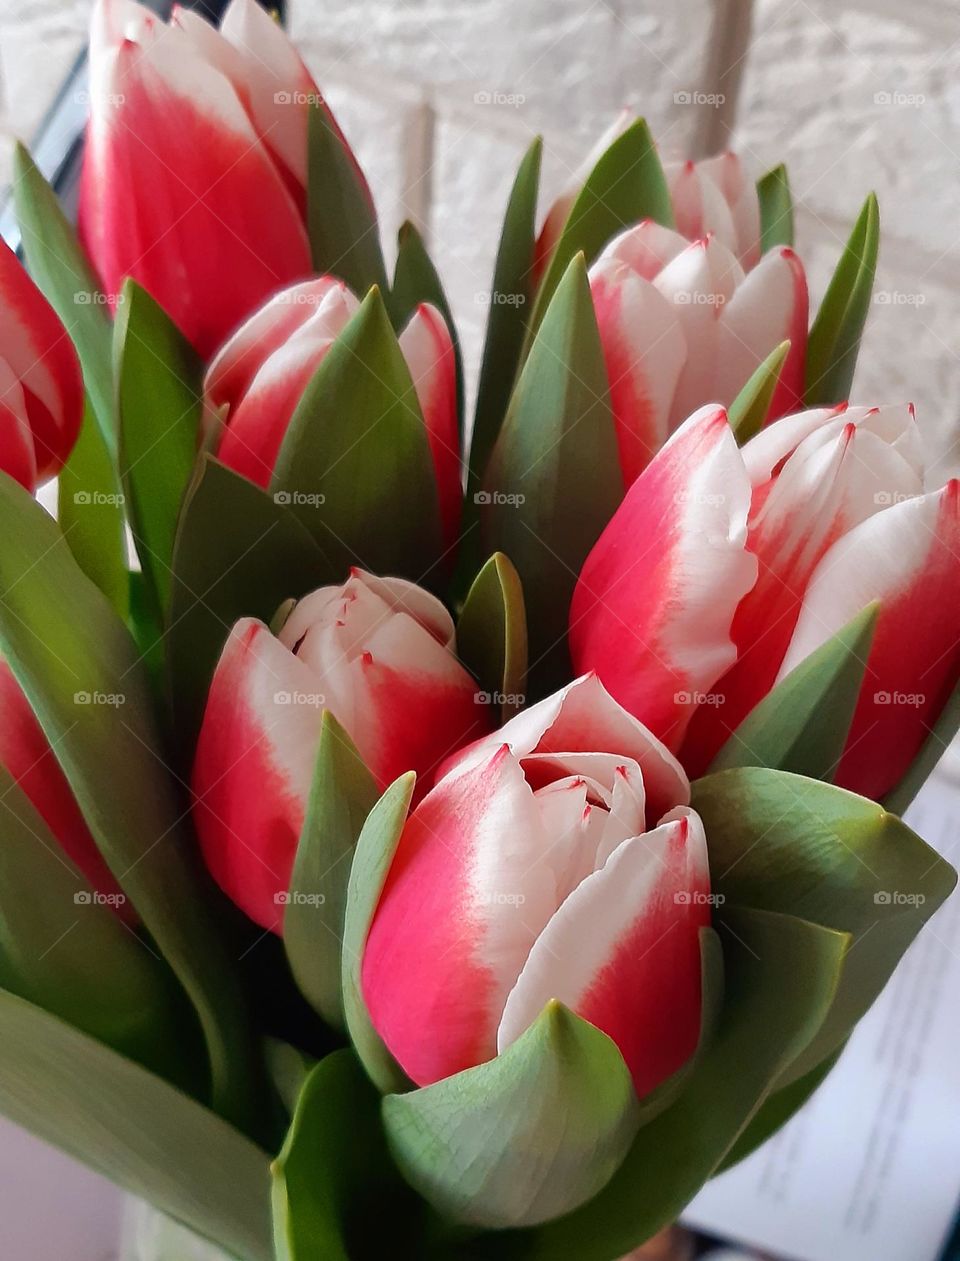 tulips are one of the first spring flowers